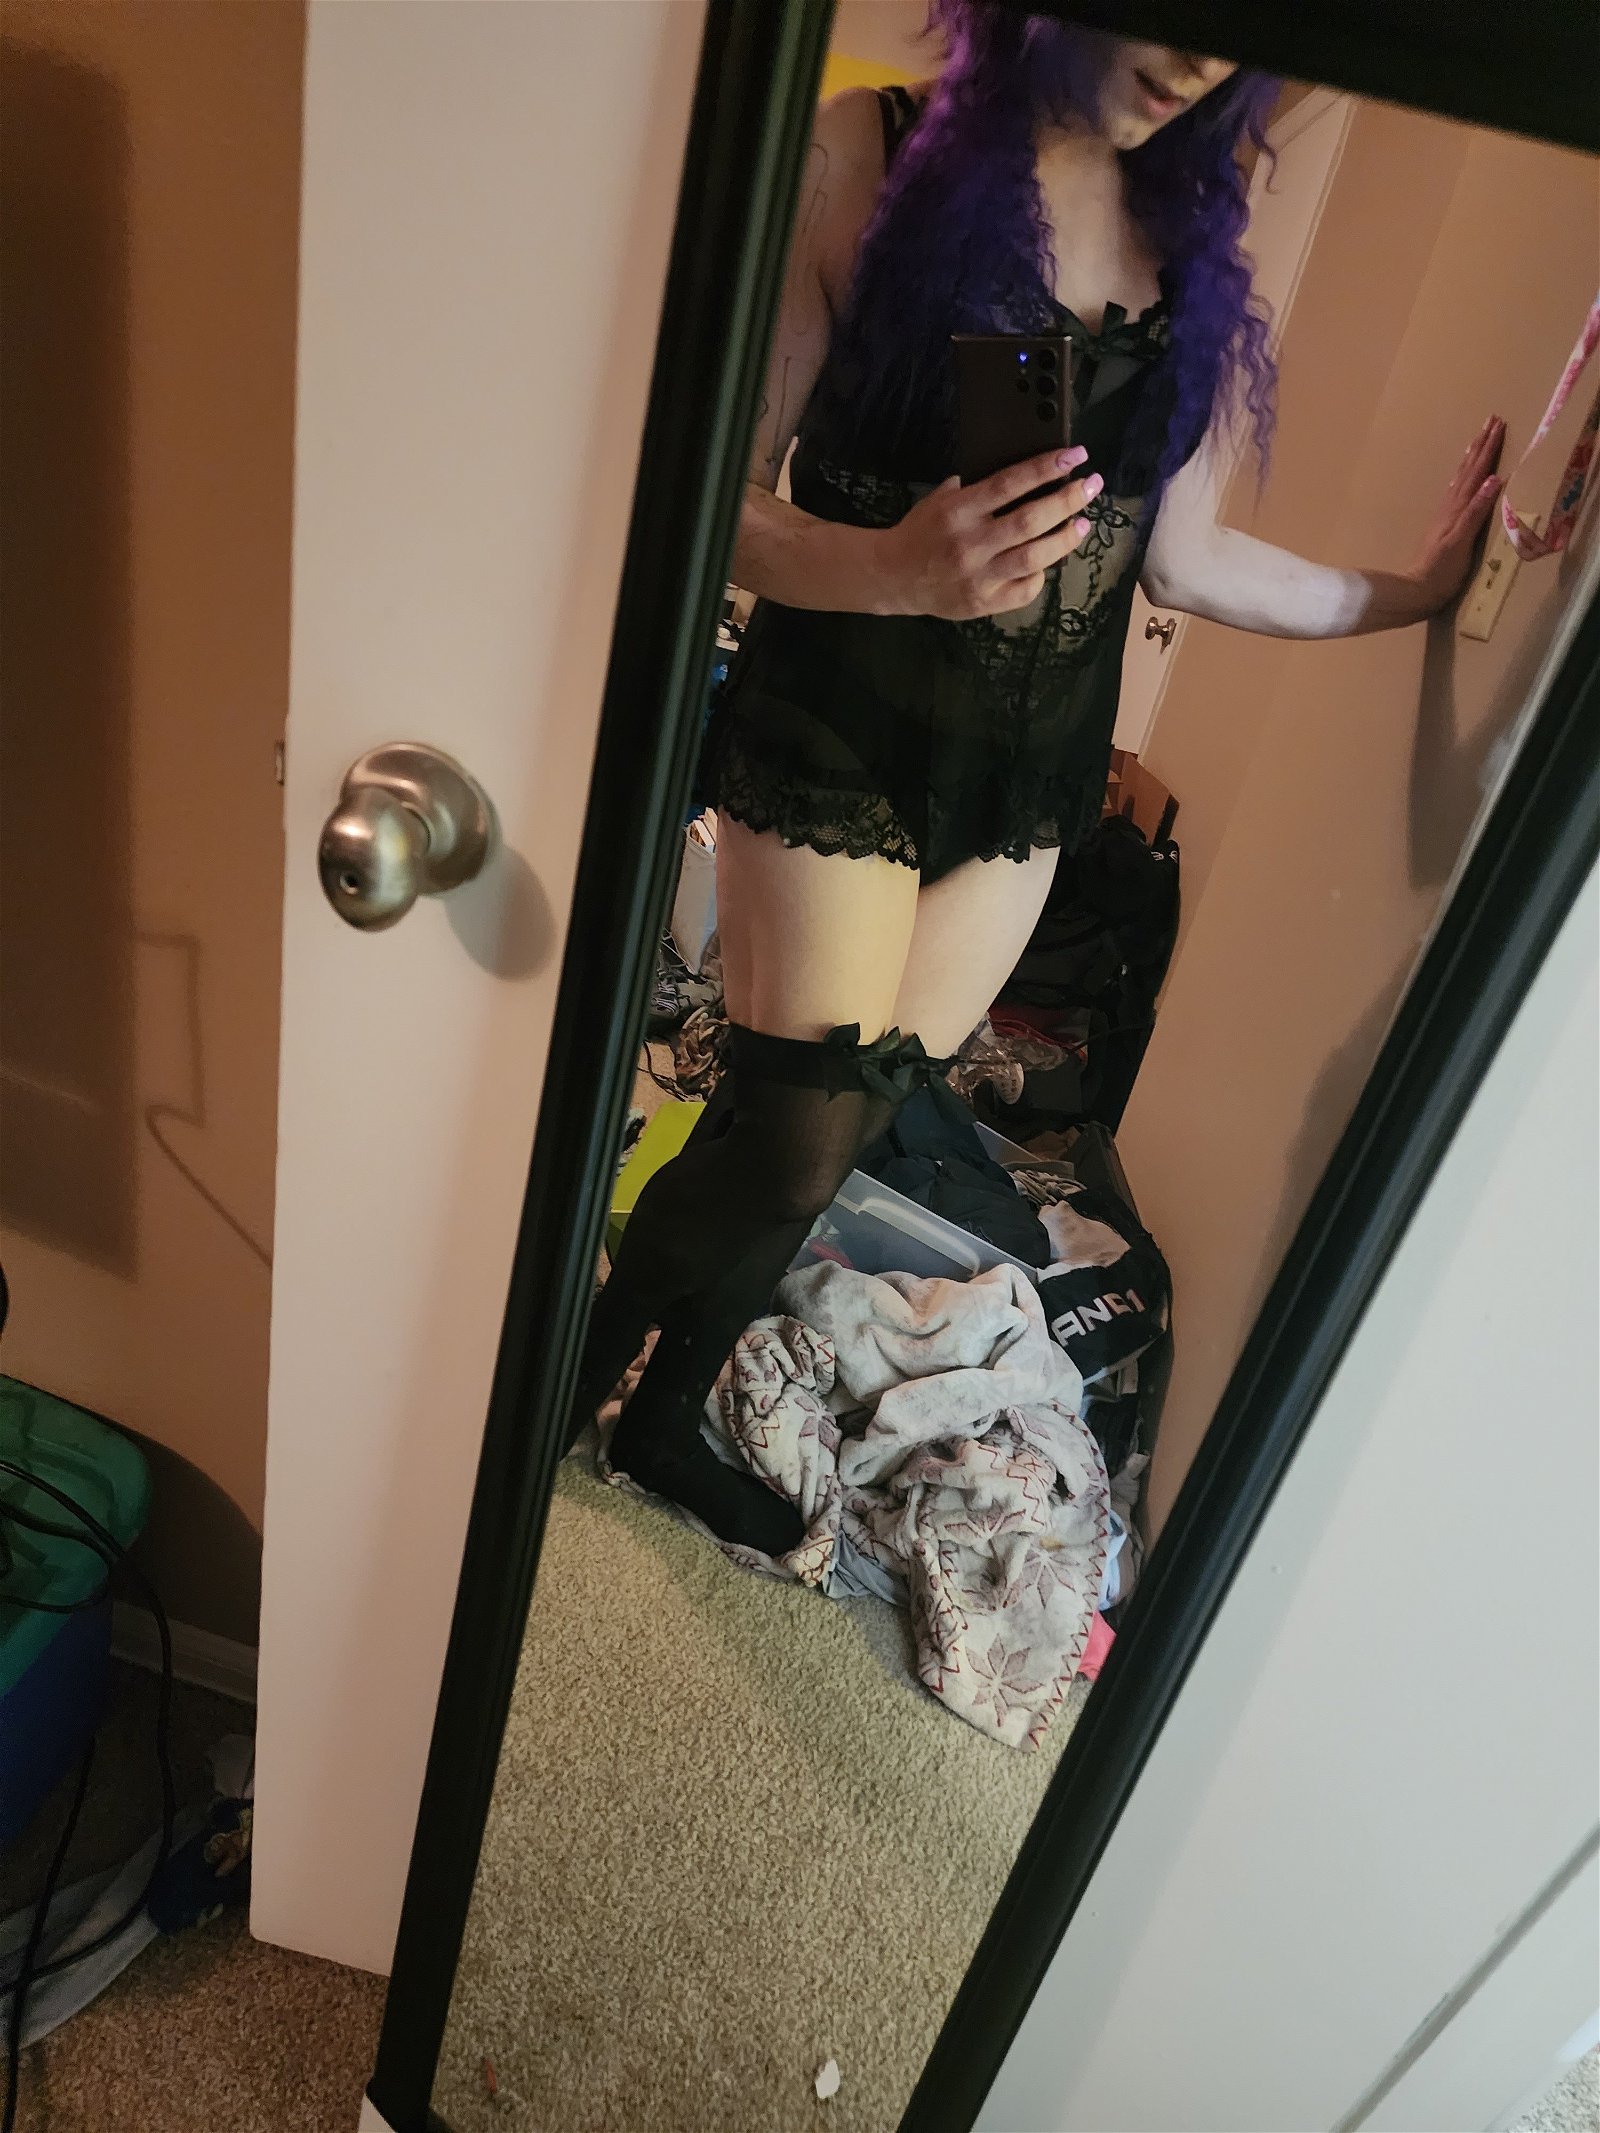 Photo by KonekoWaifu with the username @LittleNekoGirl,  February 20, 2023 at 8:27 PM. The post is about the topic Trans Women and the text says 'When you get dressed all sexy only to not be bent over and fucked deep like you need.  #girlnextdoor #poly #slut #submissive #Transgirl'